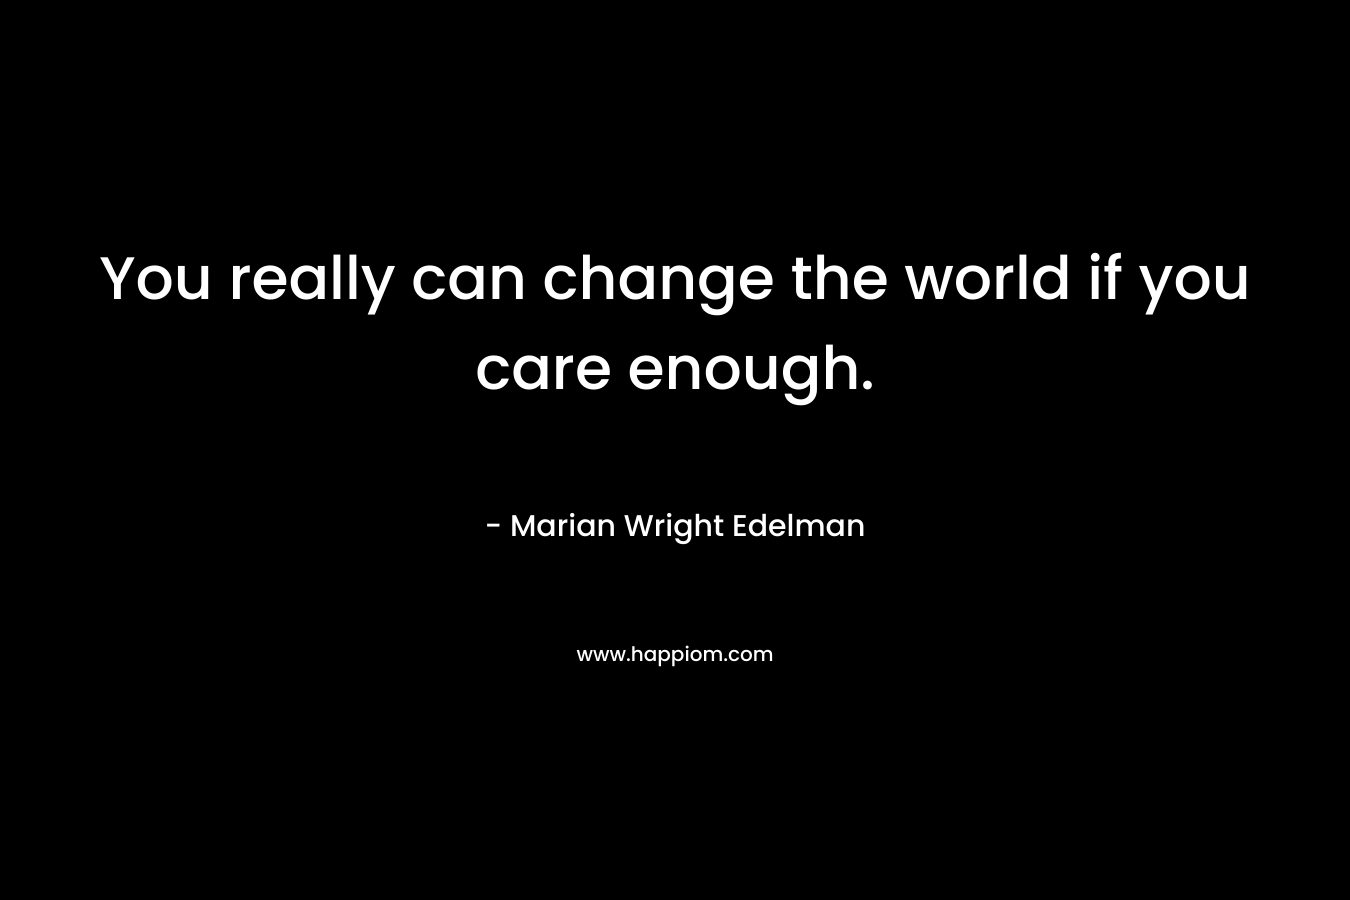 You really can change the world if you care enough. – Marian Wright Edelman